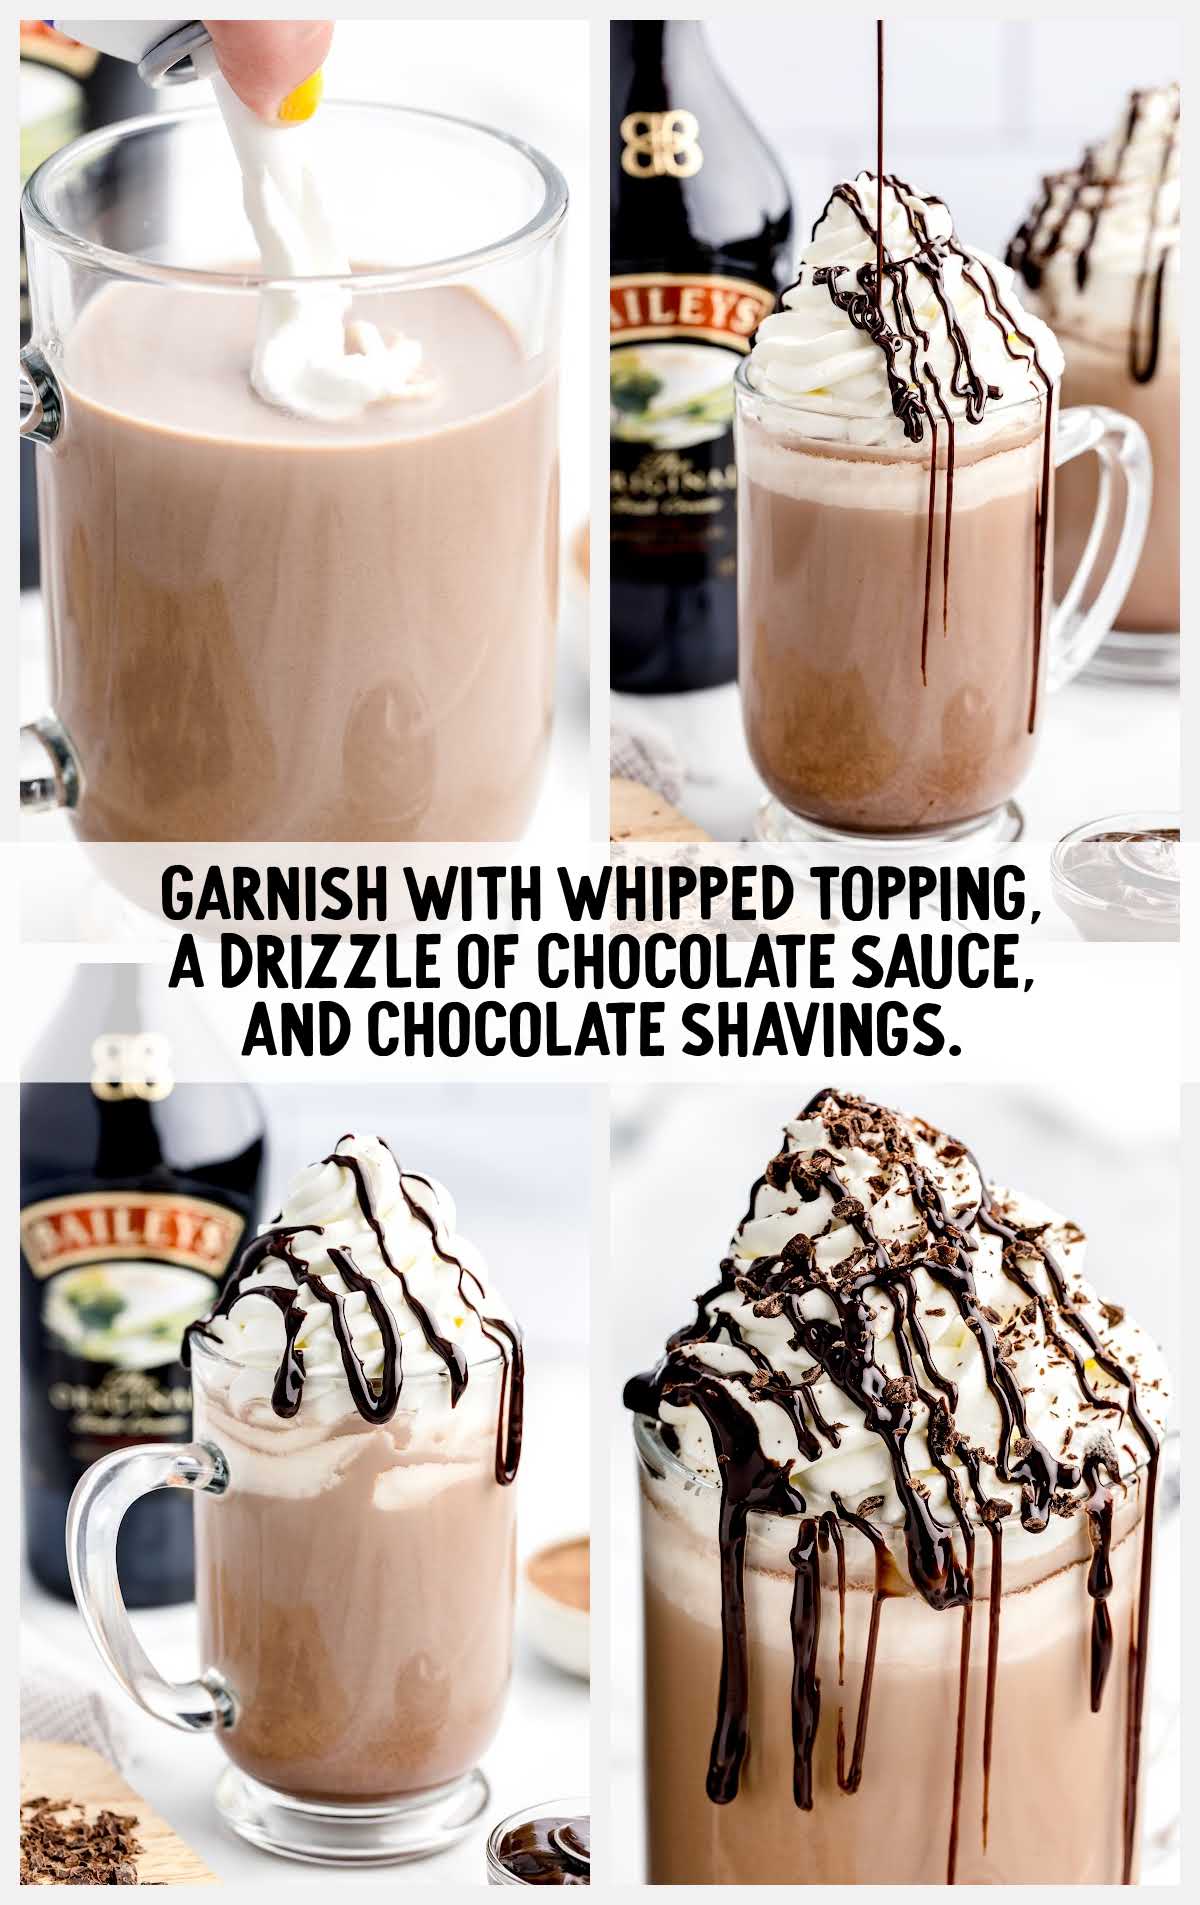 whipped topping, chocolate sauce, and chocolate shaving garnished on top of the hot chocolate